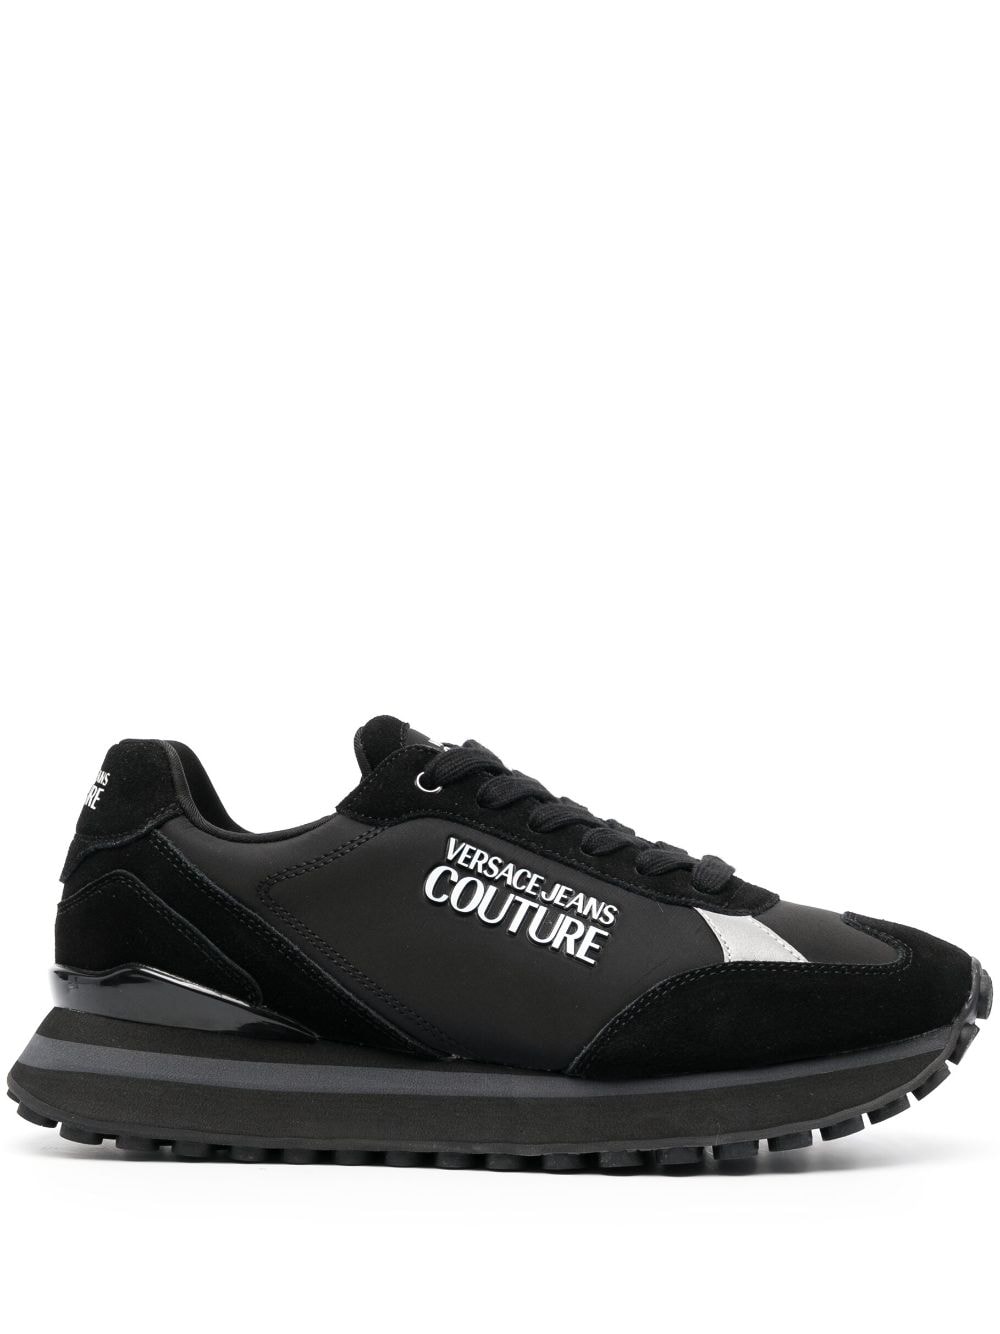 Versace Jeans Couture Fondo Spyke low-top sneakers - Black von Versace Jeans Couture